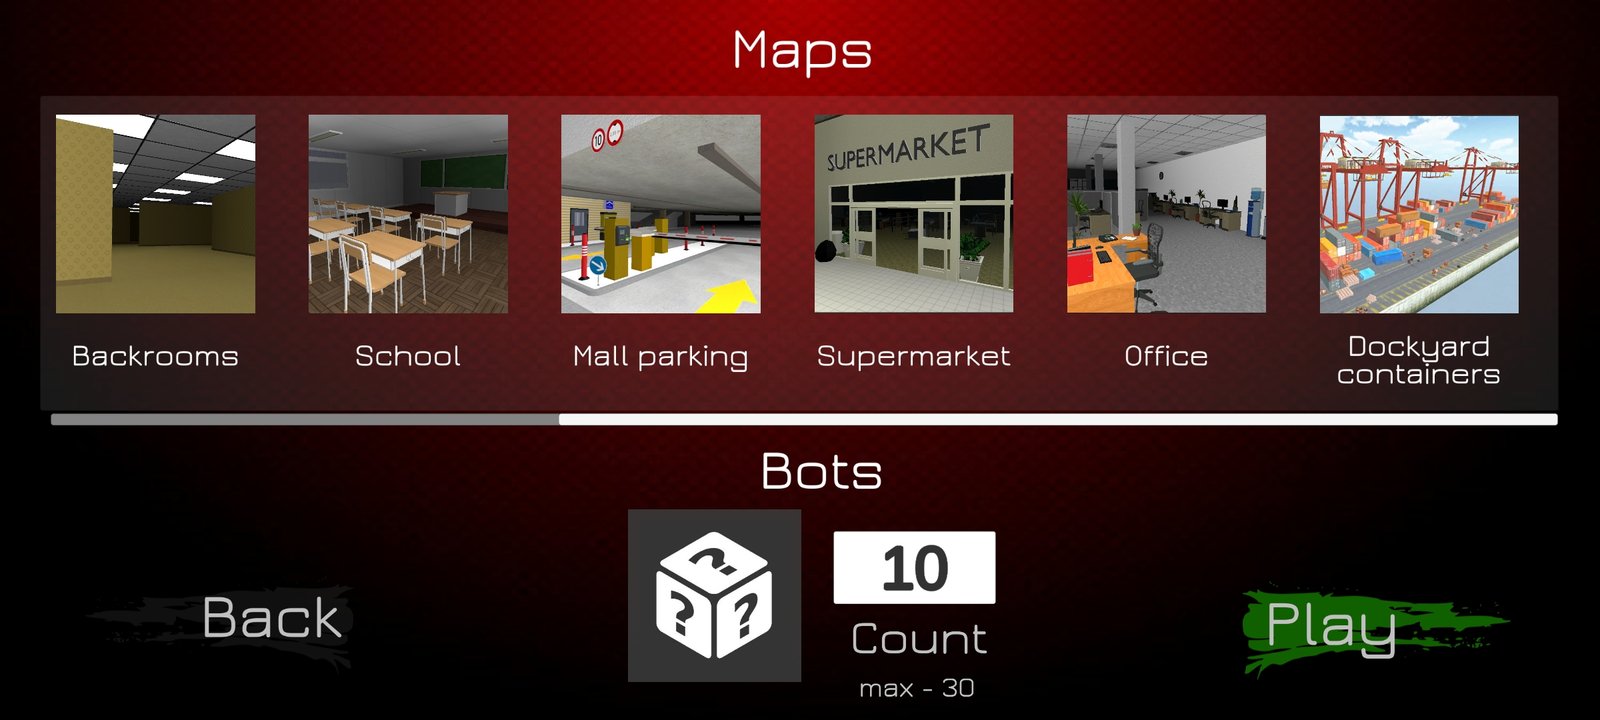 Backrooms Nextbot Chase v3 MOD APK -  - Android & iOS MODs,  Mobile Games & Apps